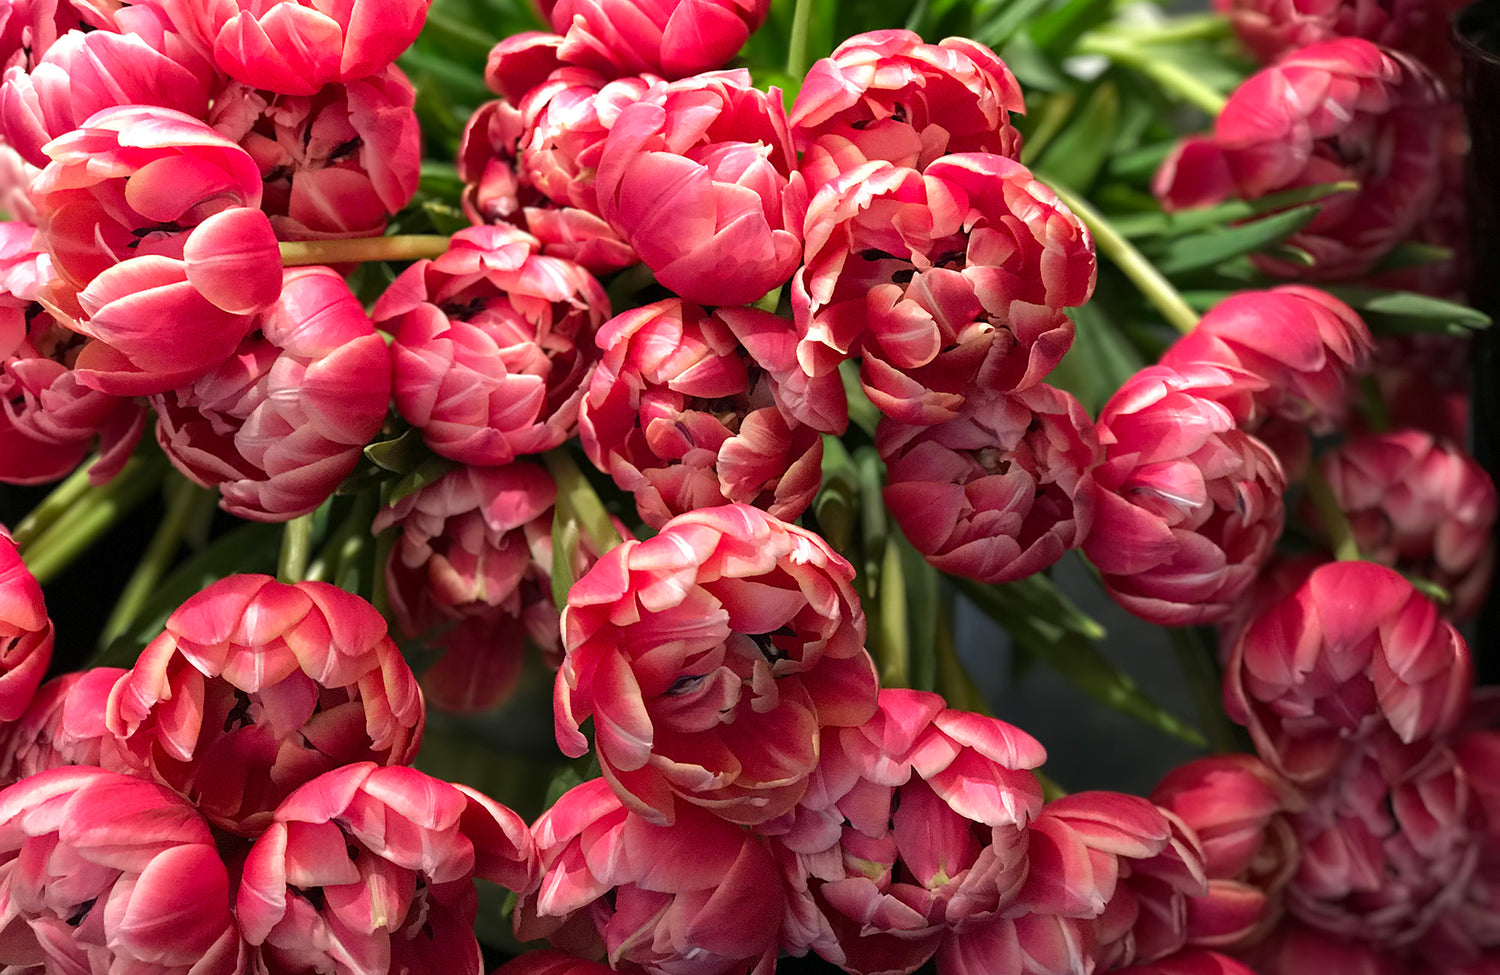 Red Tulips in a Melbourne florist ready for delivery